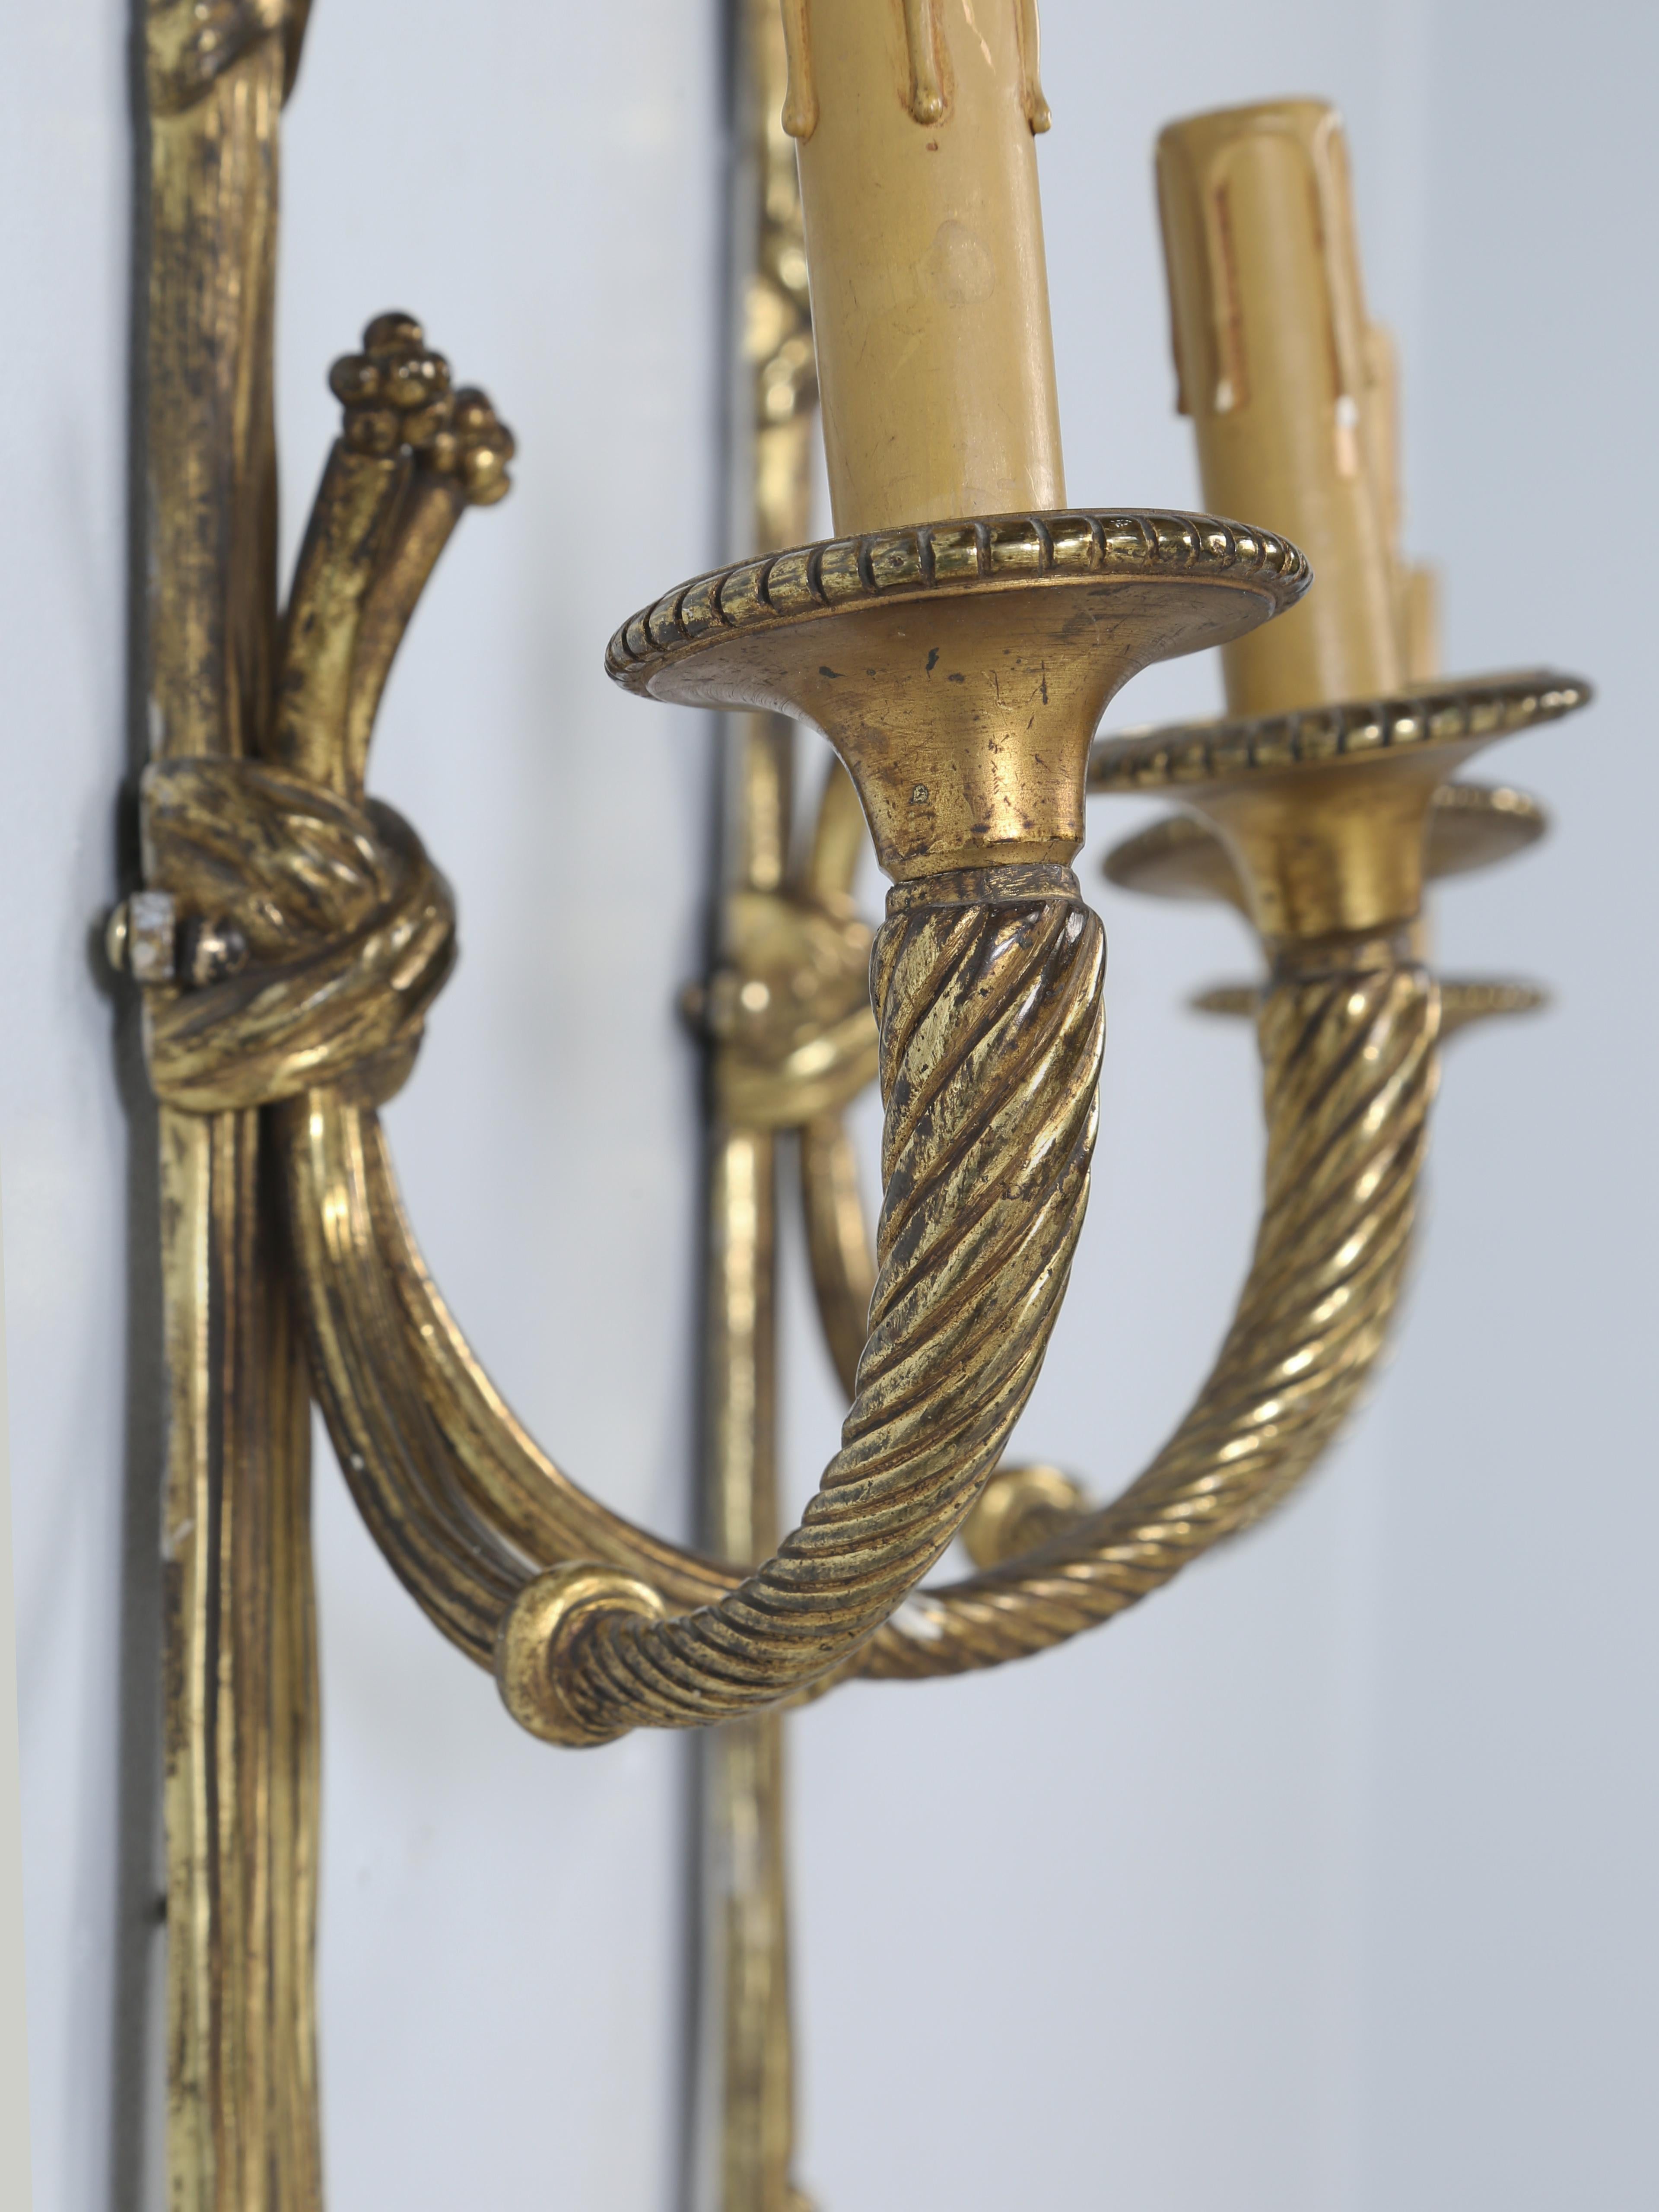 Exceptionally Fine Pair of late 1800s Louis XVI style French Gilt Bronze Sconces For Sale 5